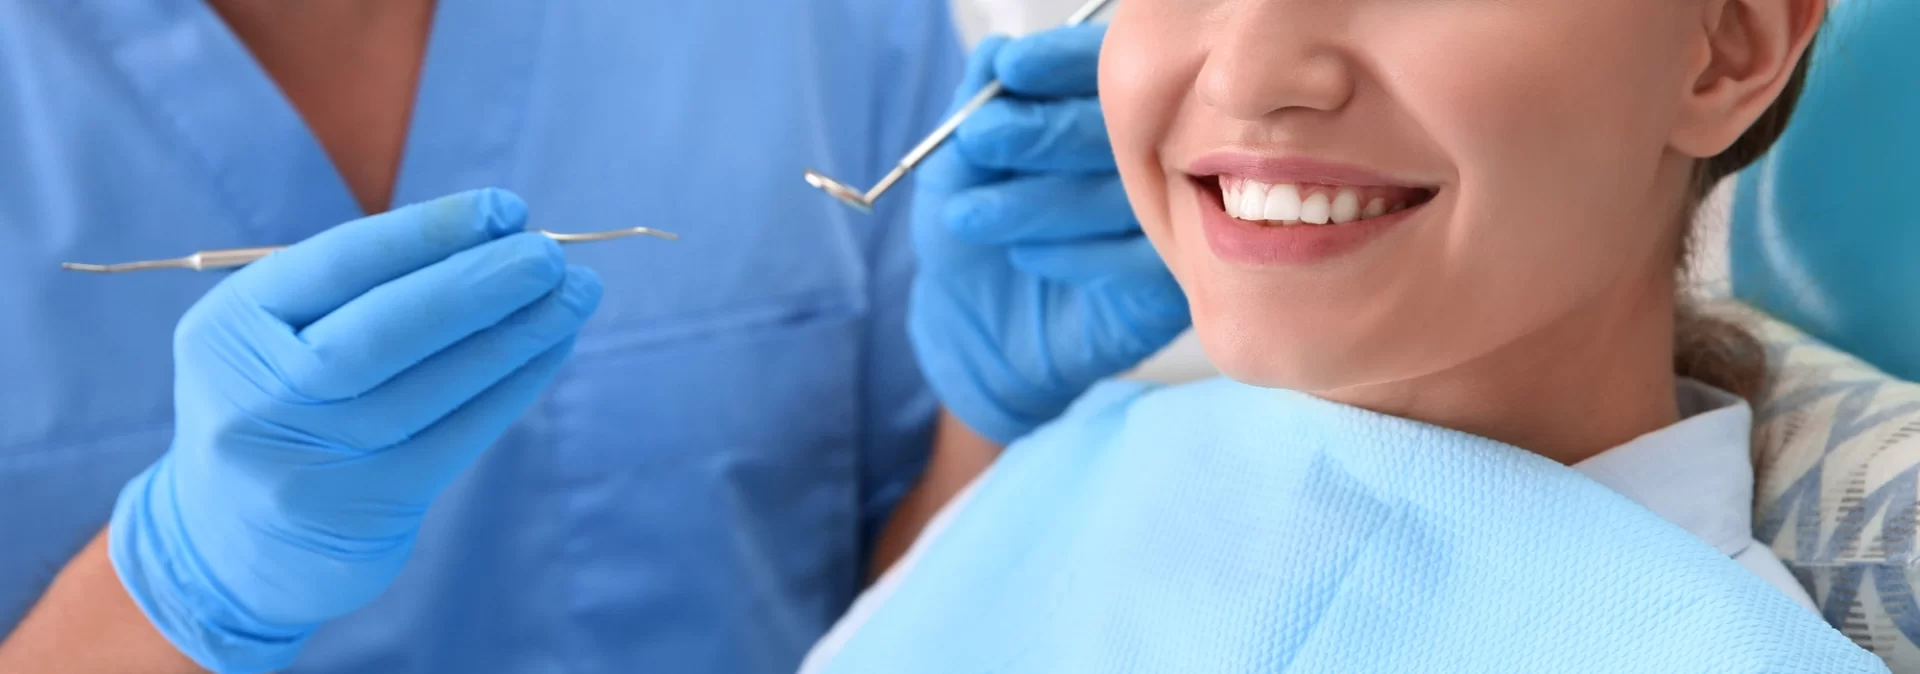 close up of the lower half of a woman's smiling face of dentist in McKinney TX | Dental Crowns